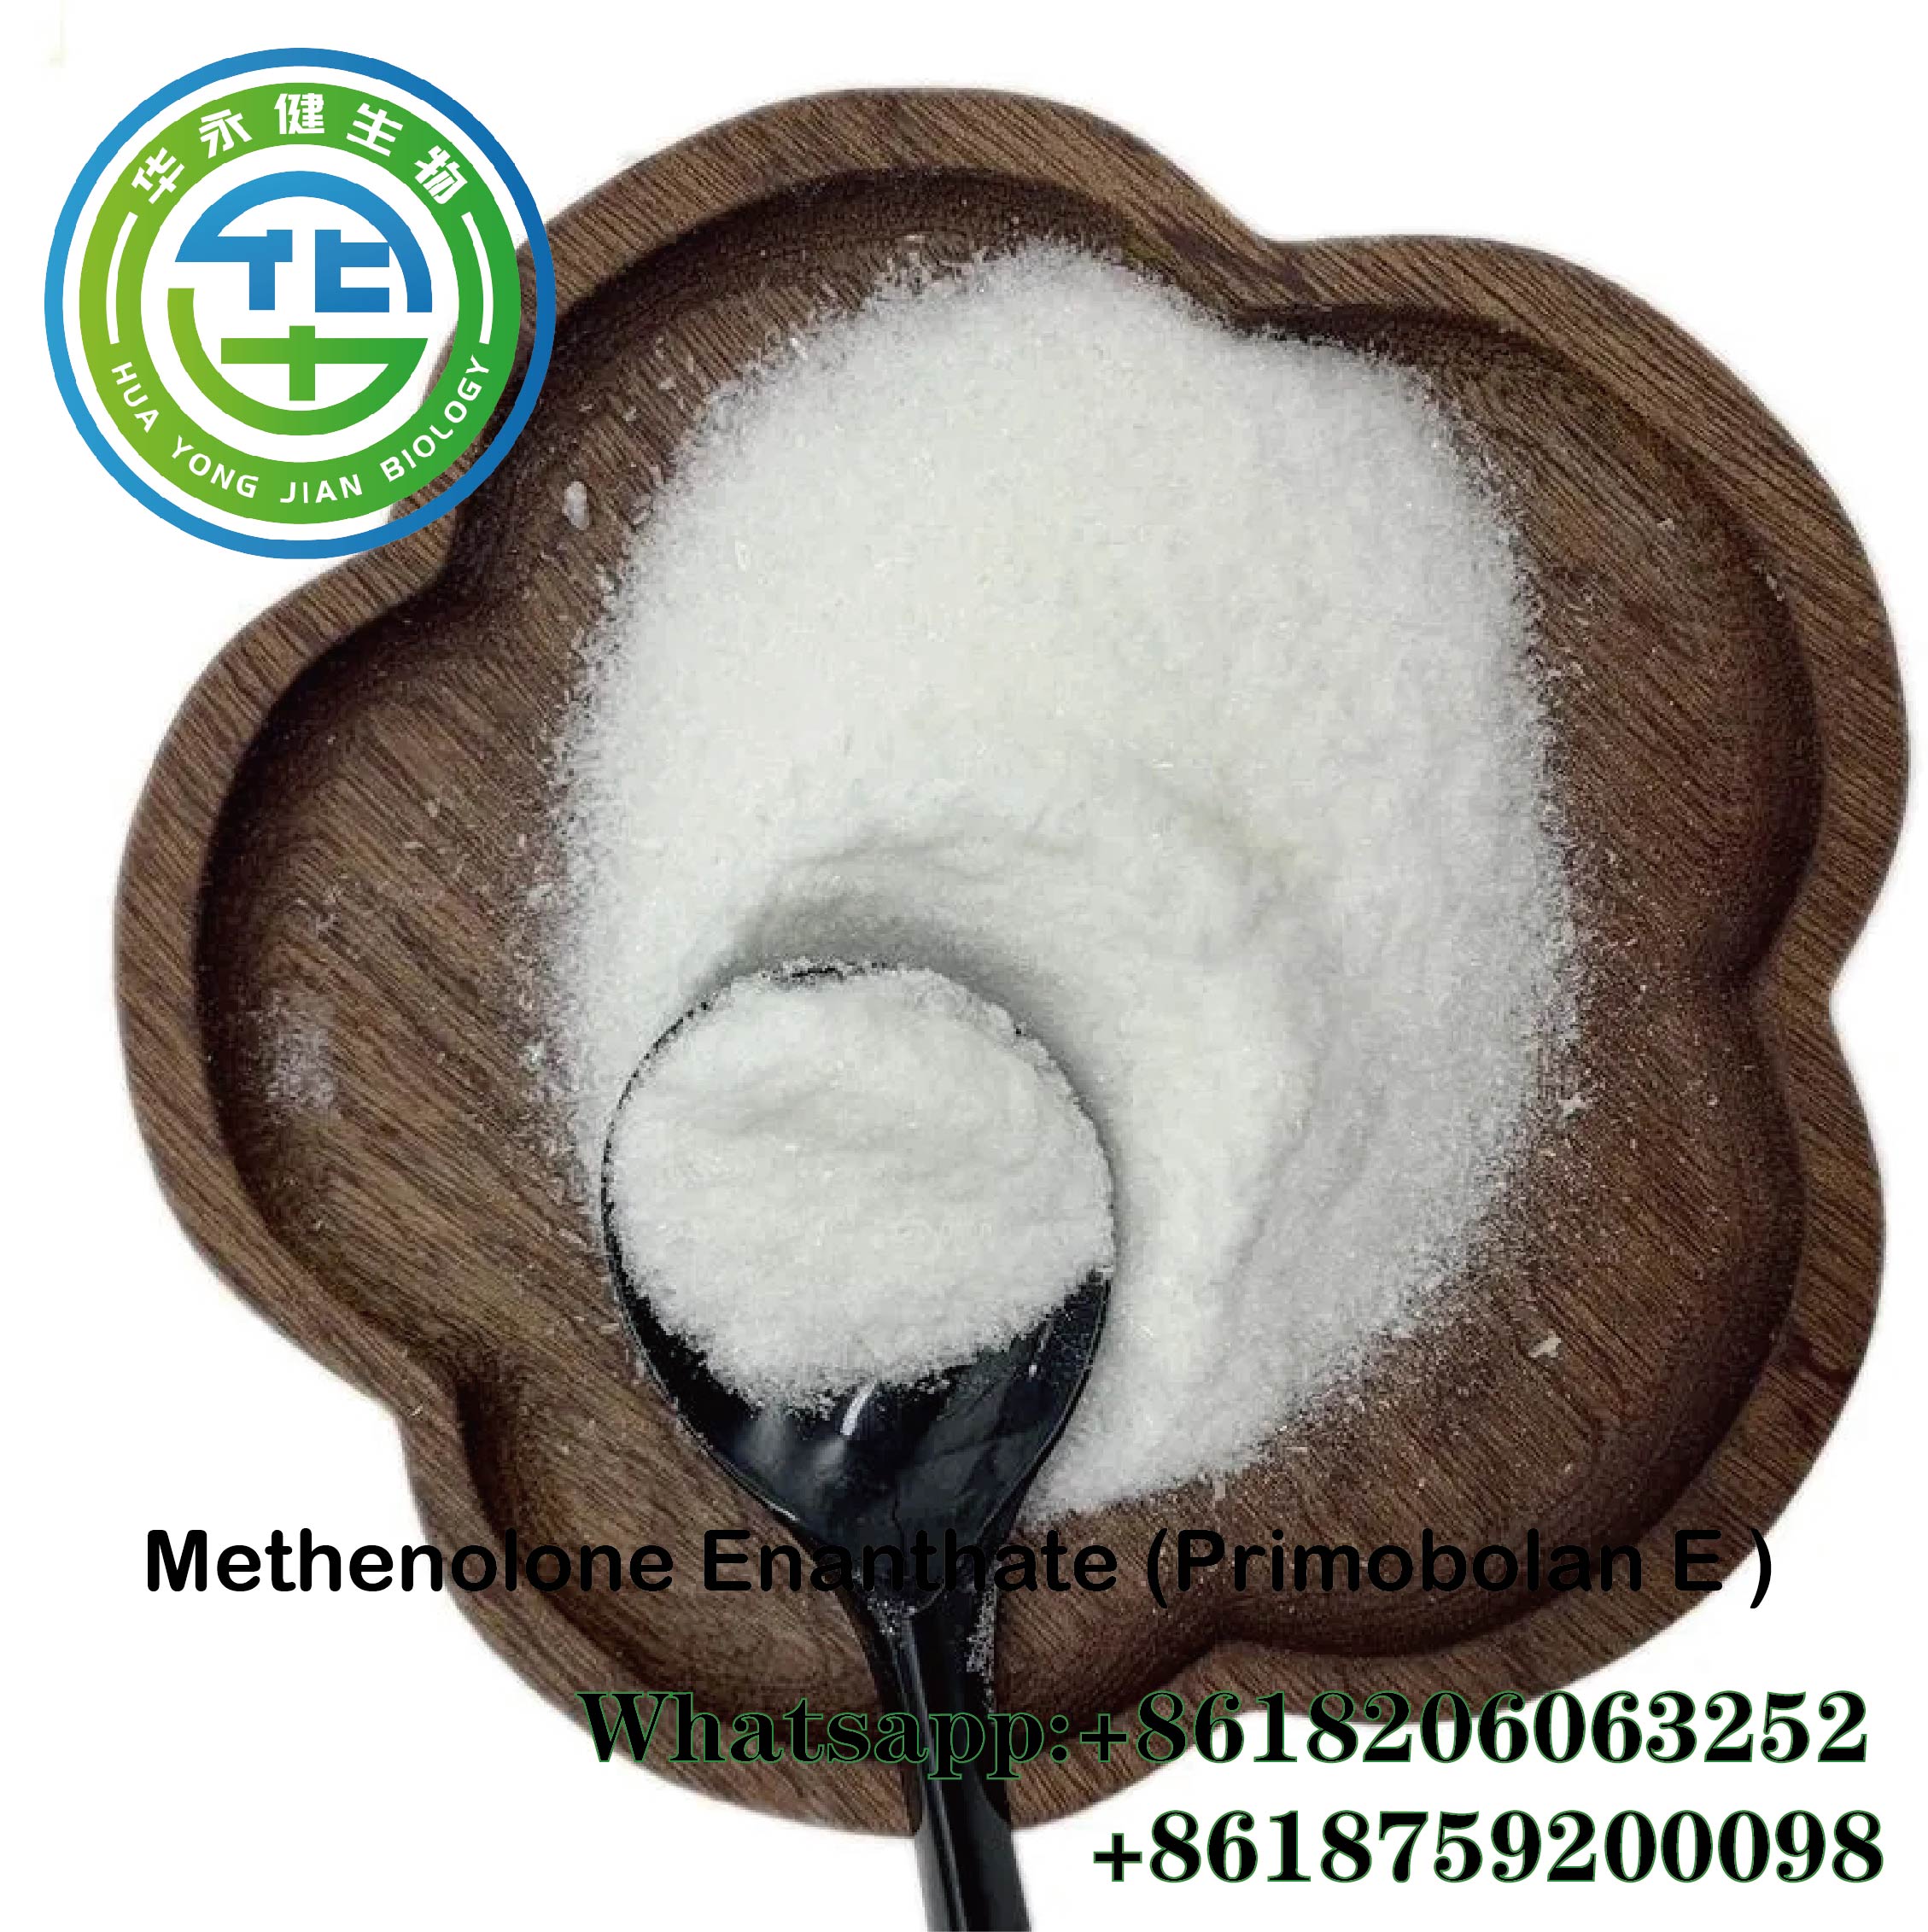 Methenolone Enanthate Raw Powder CAS 303-42-4 Steroids for Primobolan Muscle Gain Repeat Order with Fast Delivery to Brazil Safely